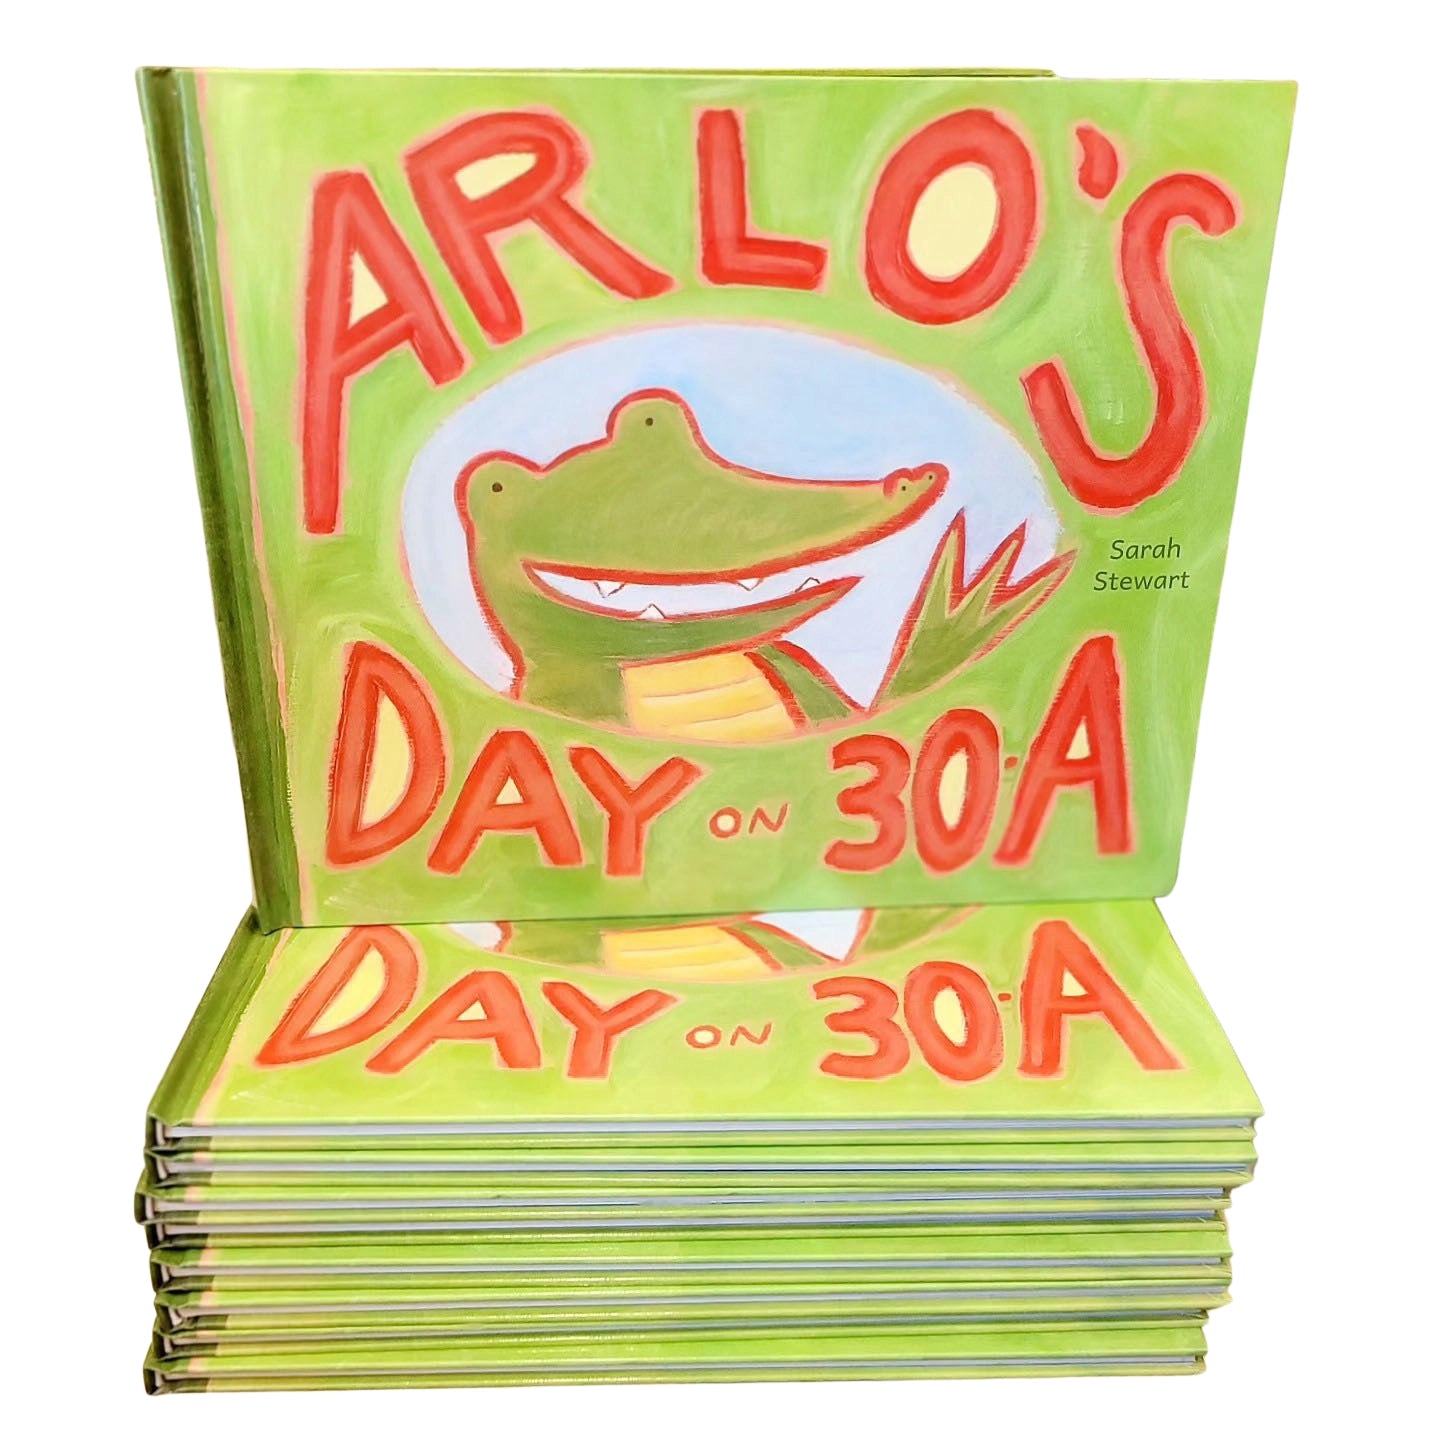 Arlo's Day on 30A by Sarah Stewart